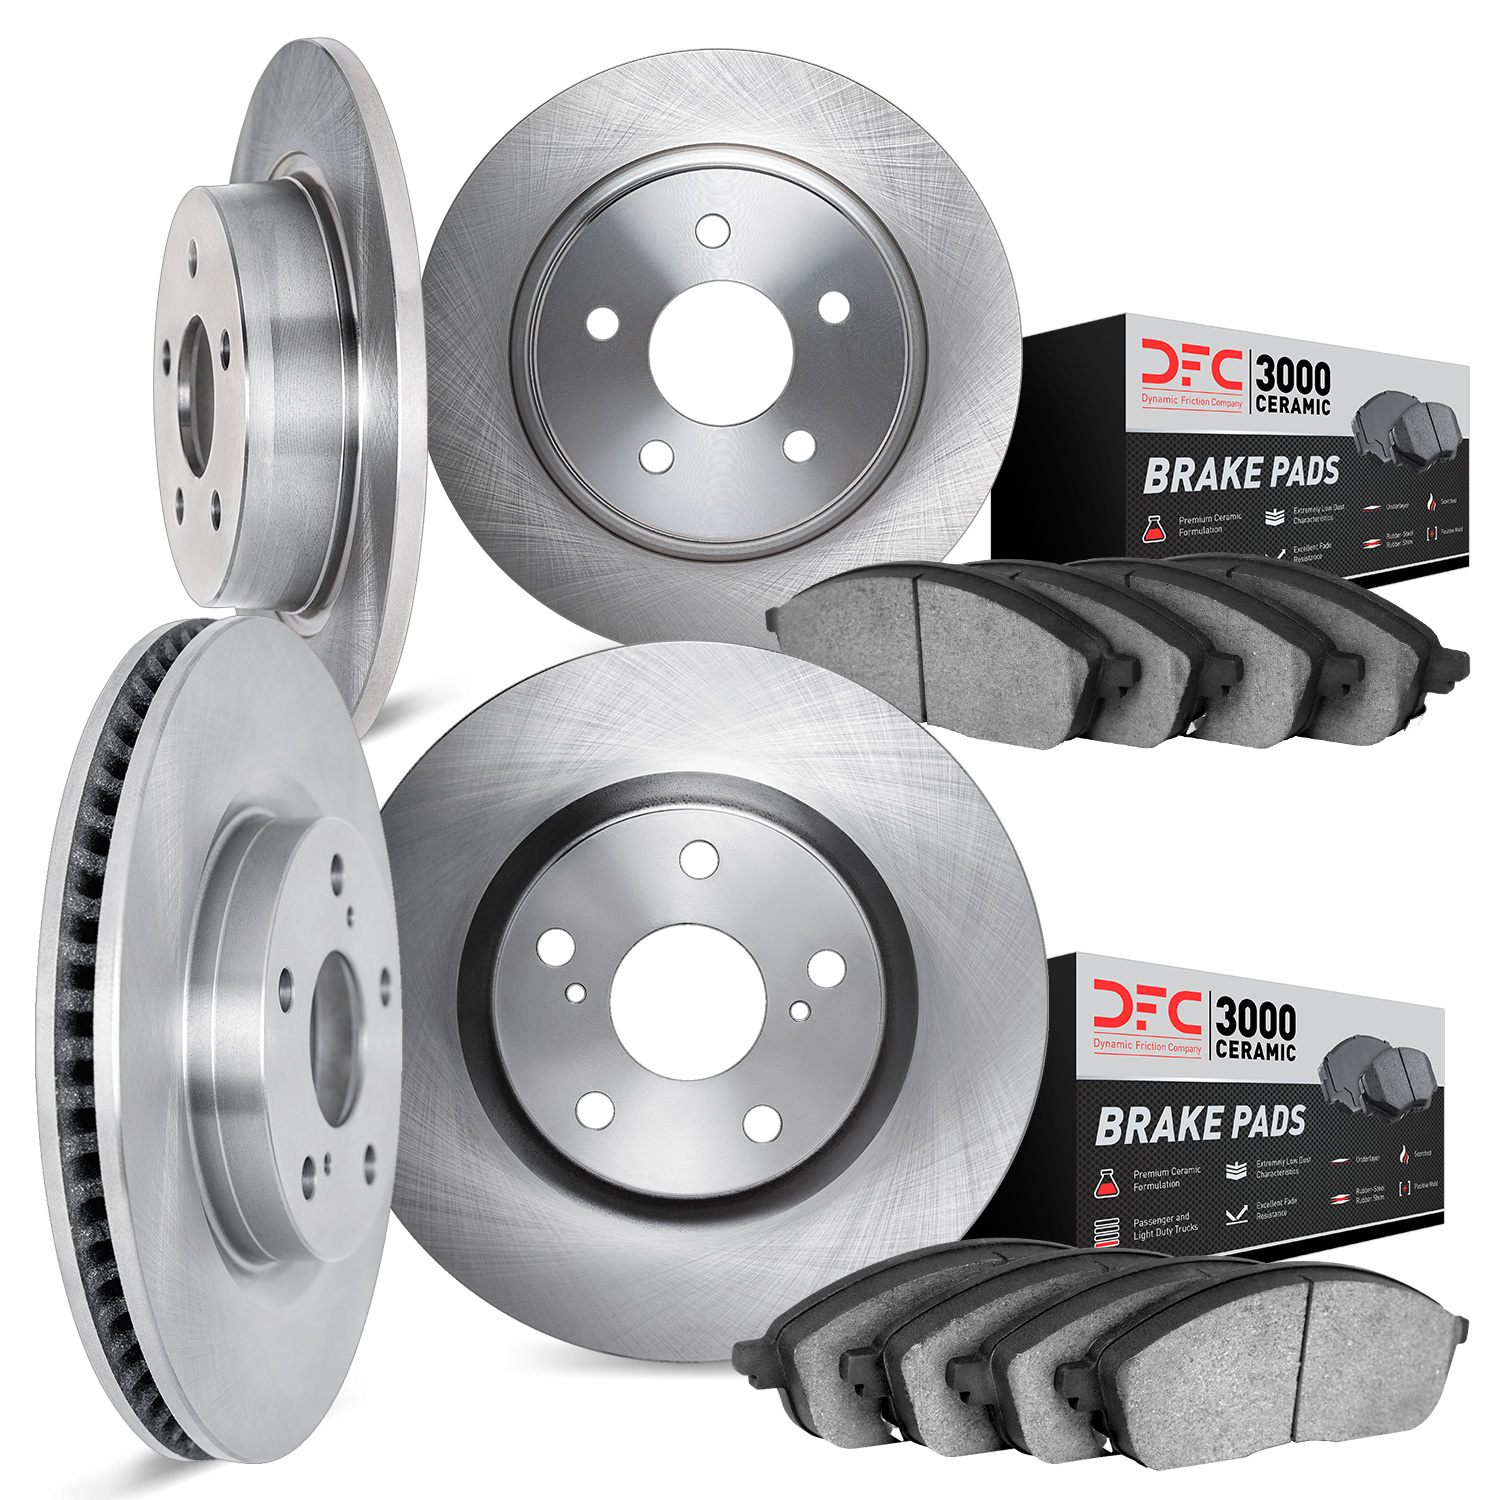 6304-73043 Brake Rotors with 3000-Series Ceramic Brake Pads Kit, 1998-2001 Audi/Volkswagen, Position: Front and Rear